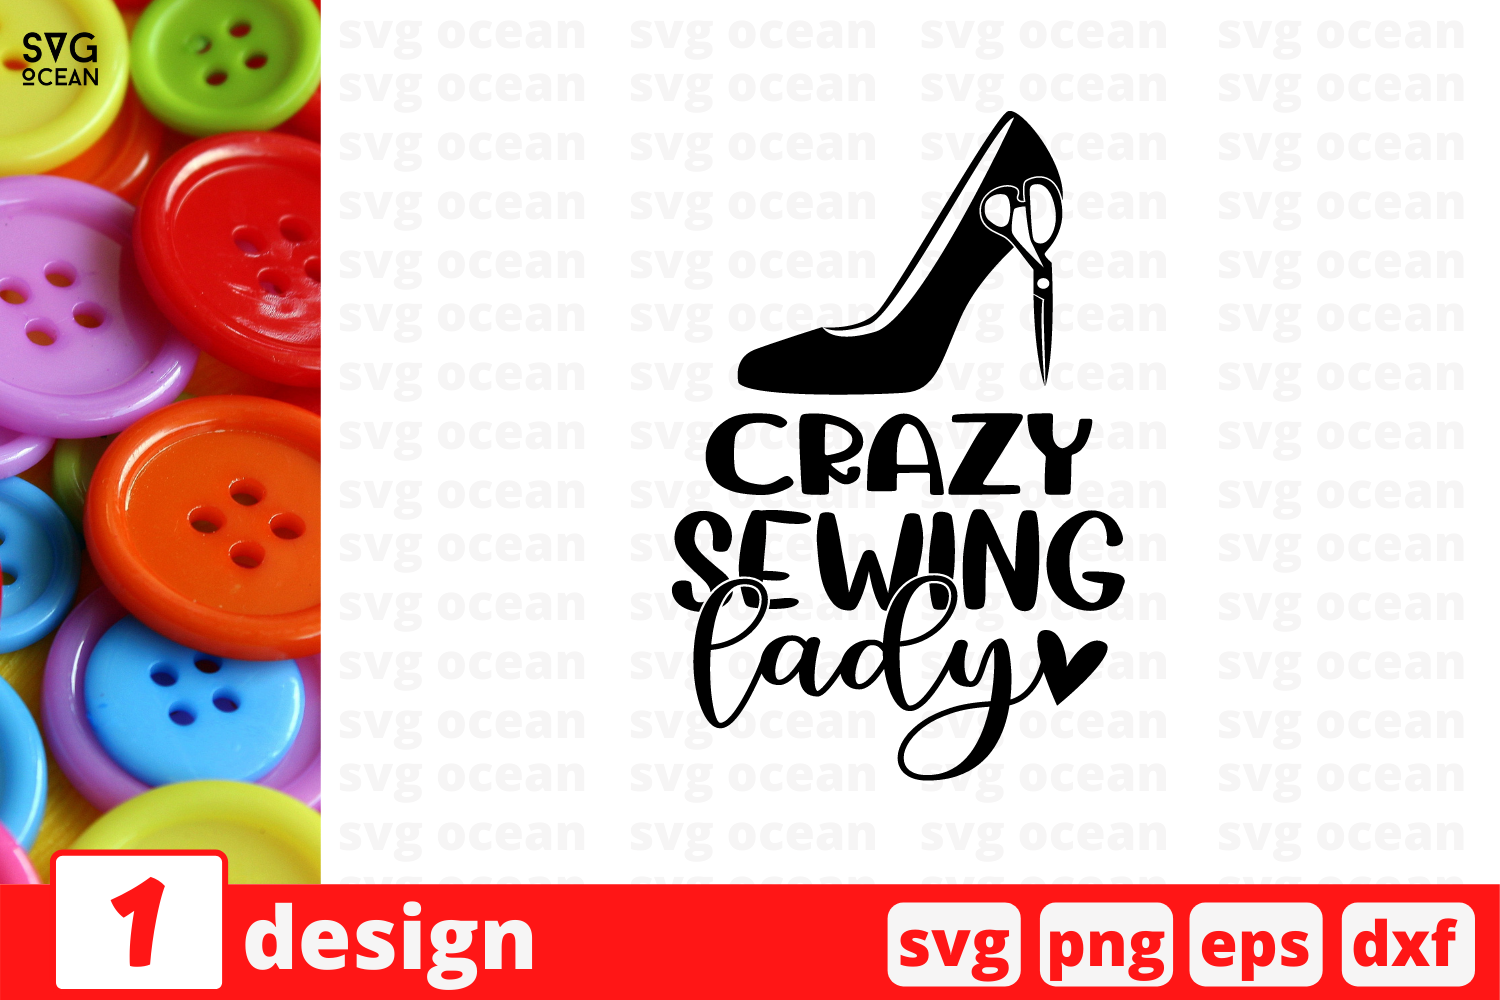 Download Crazy Sewing Lady Svg Cut File By Svgocean Thehungryjpeg Com